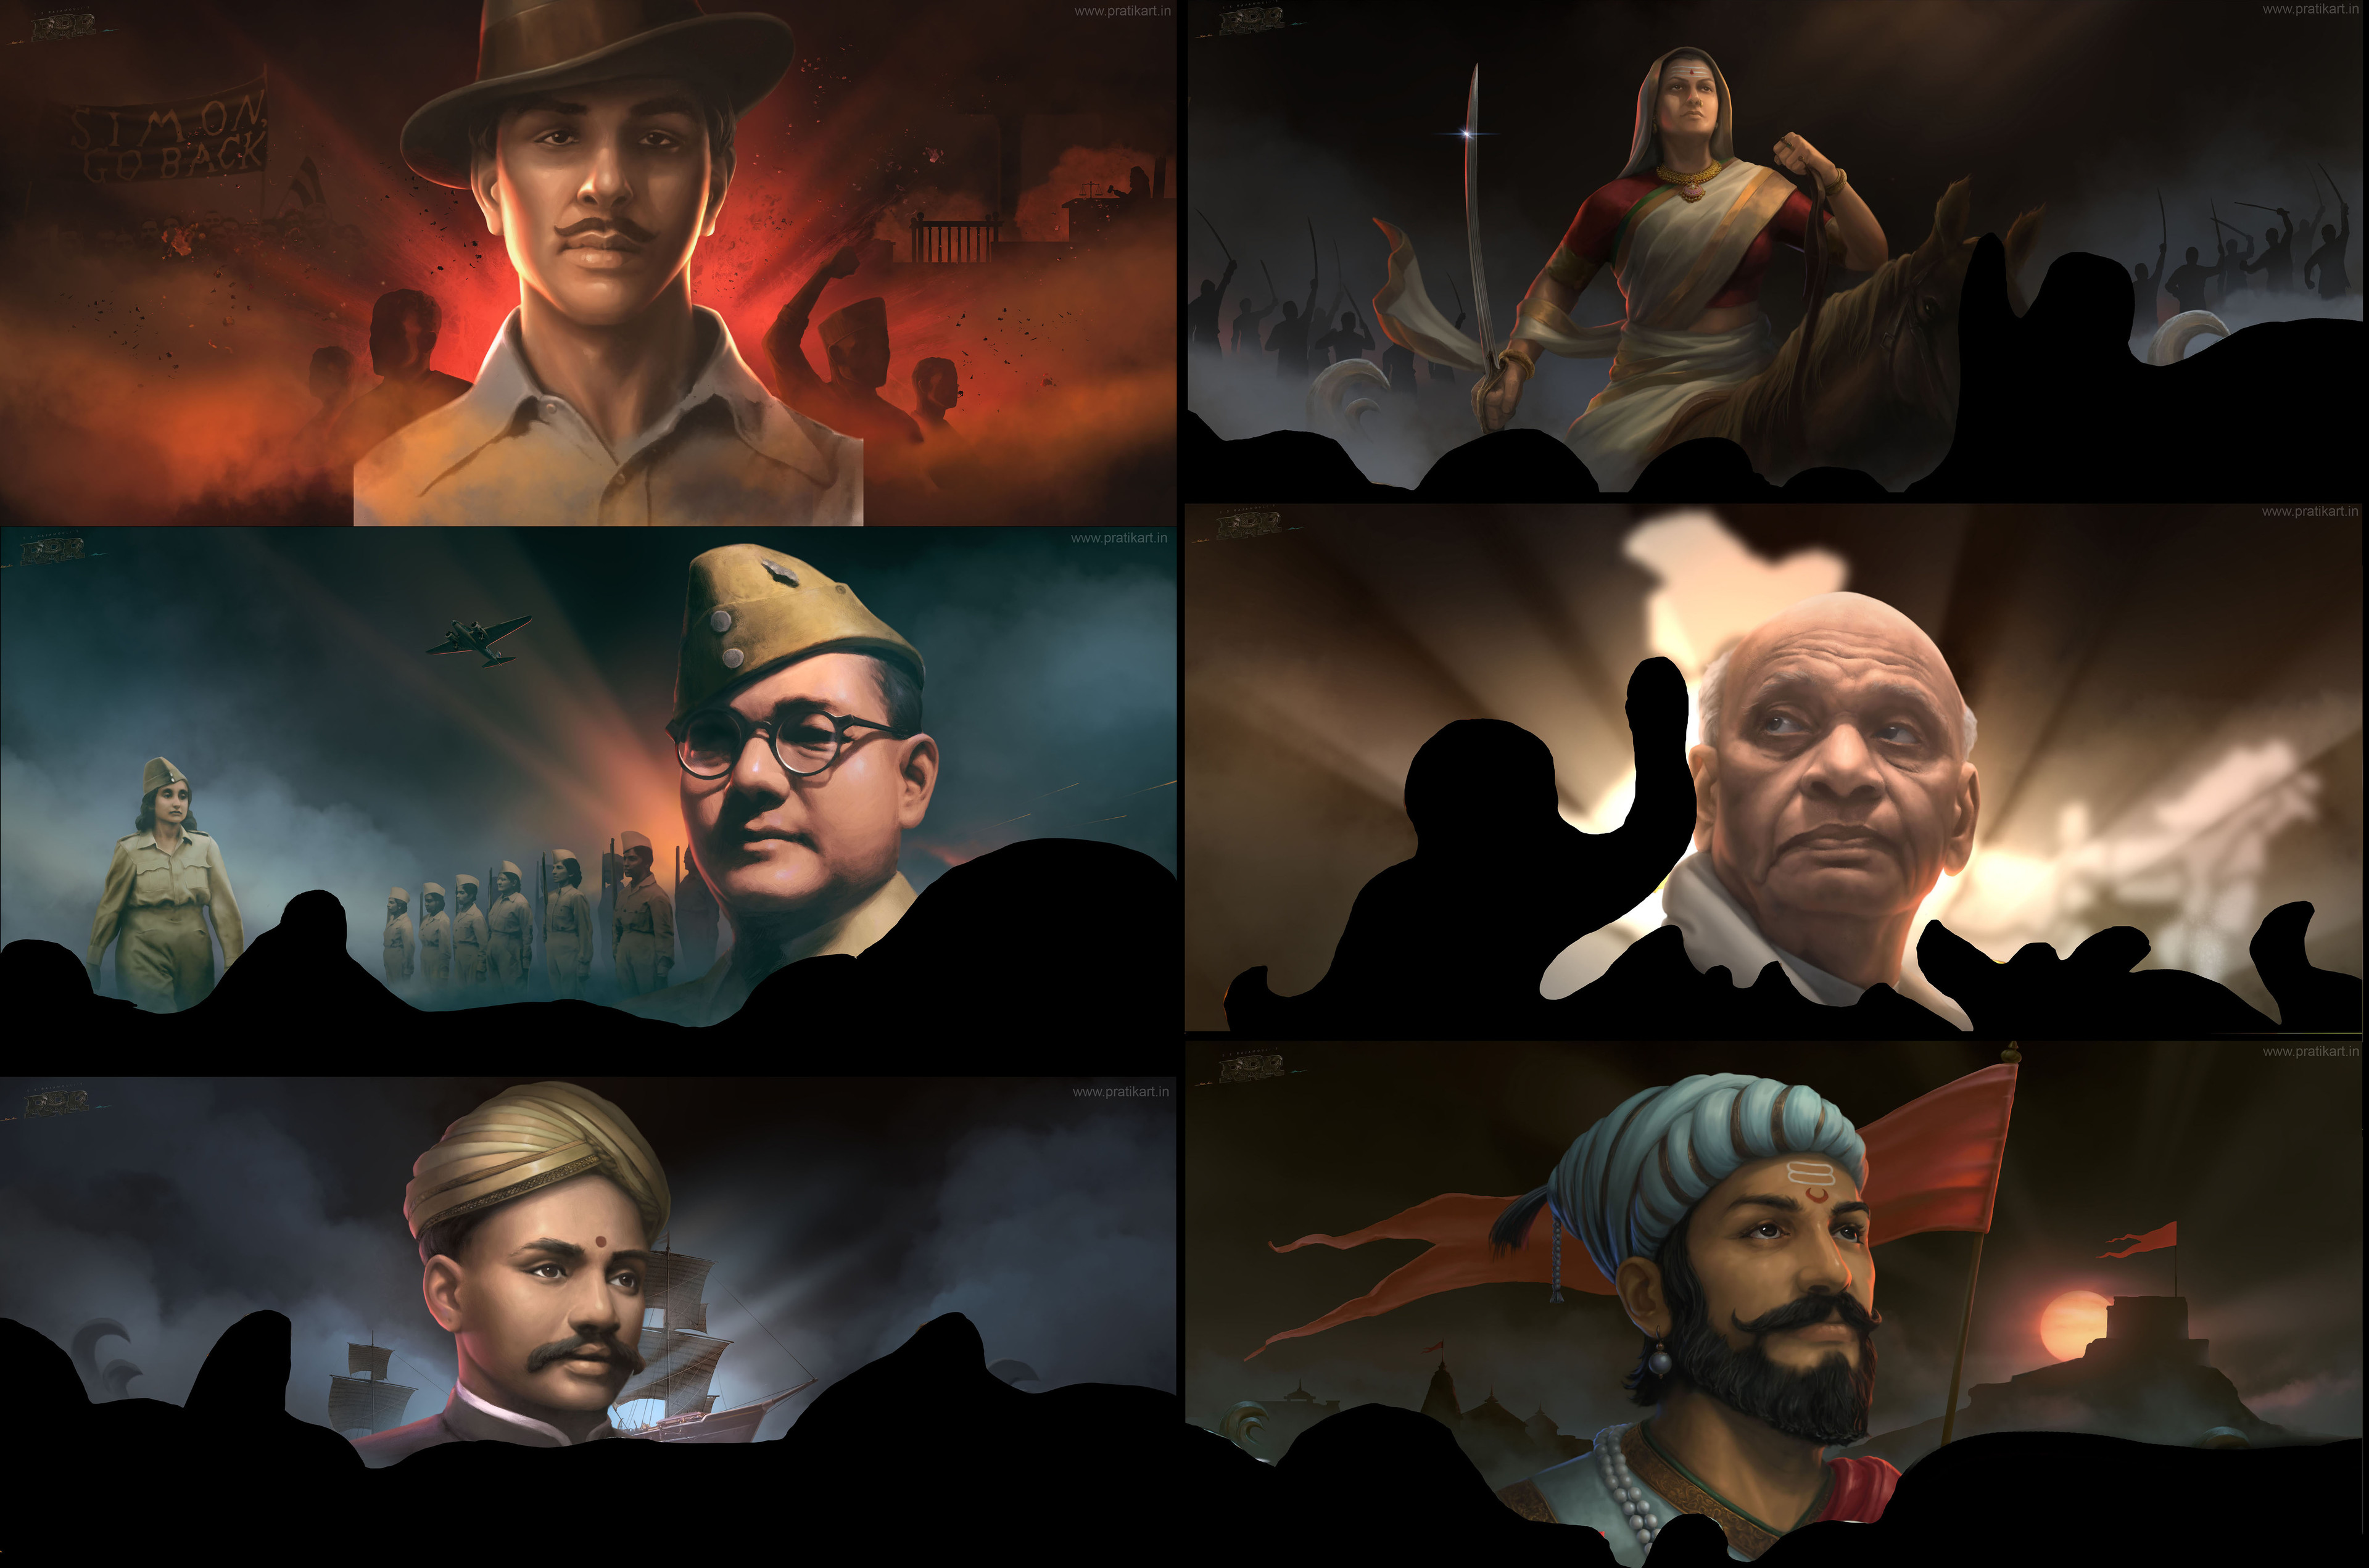 It was my honour and pleasure to paint the portraits of all the heroes who contributed to Bharat's freedom. 🙏